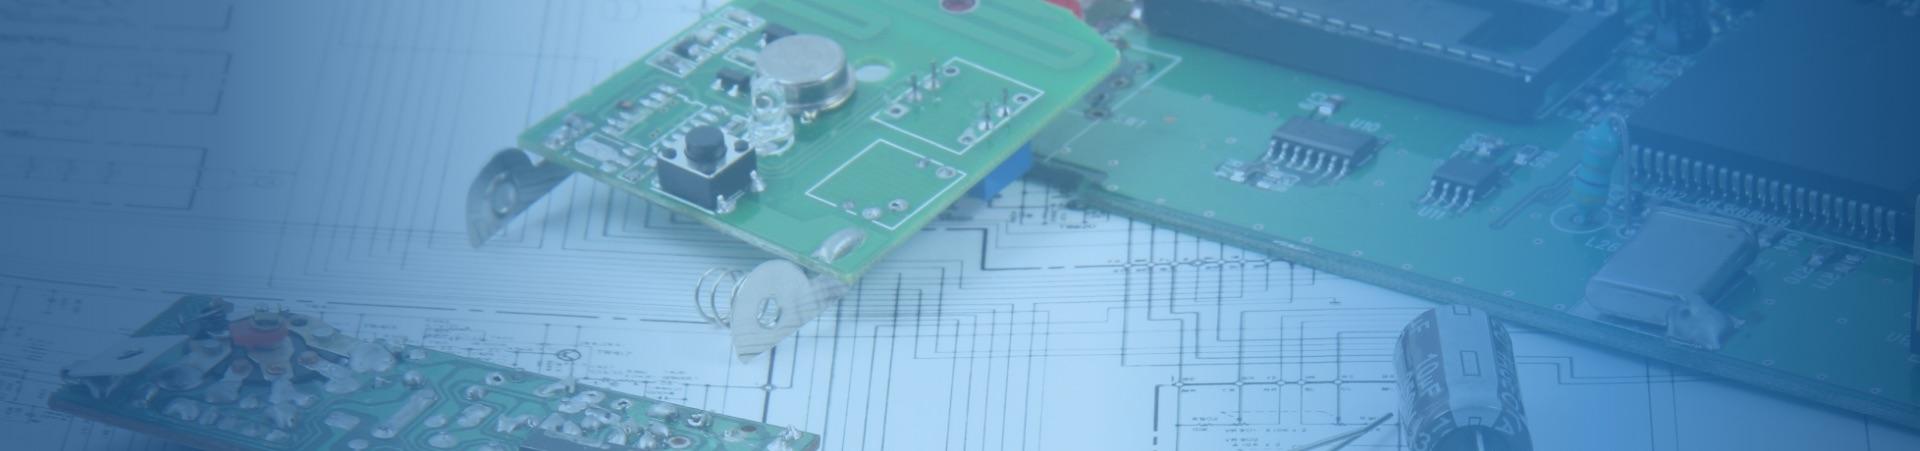 Lead Free Circuit Board Assembly Services.jpg